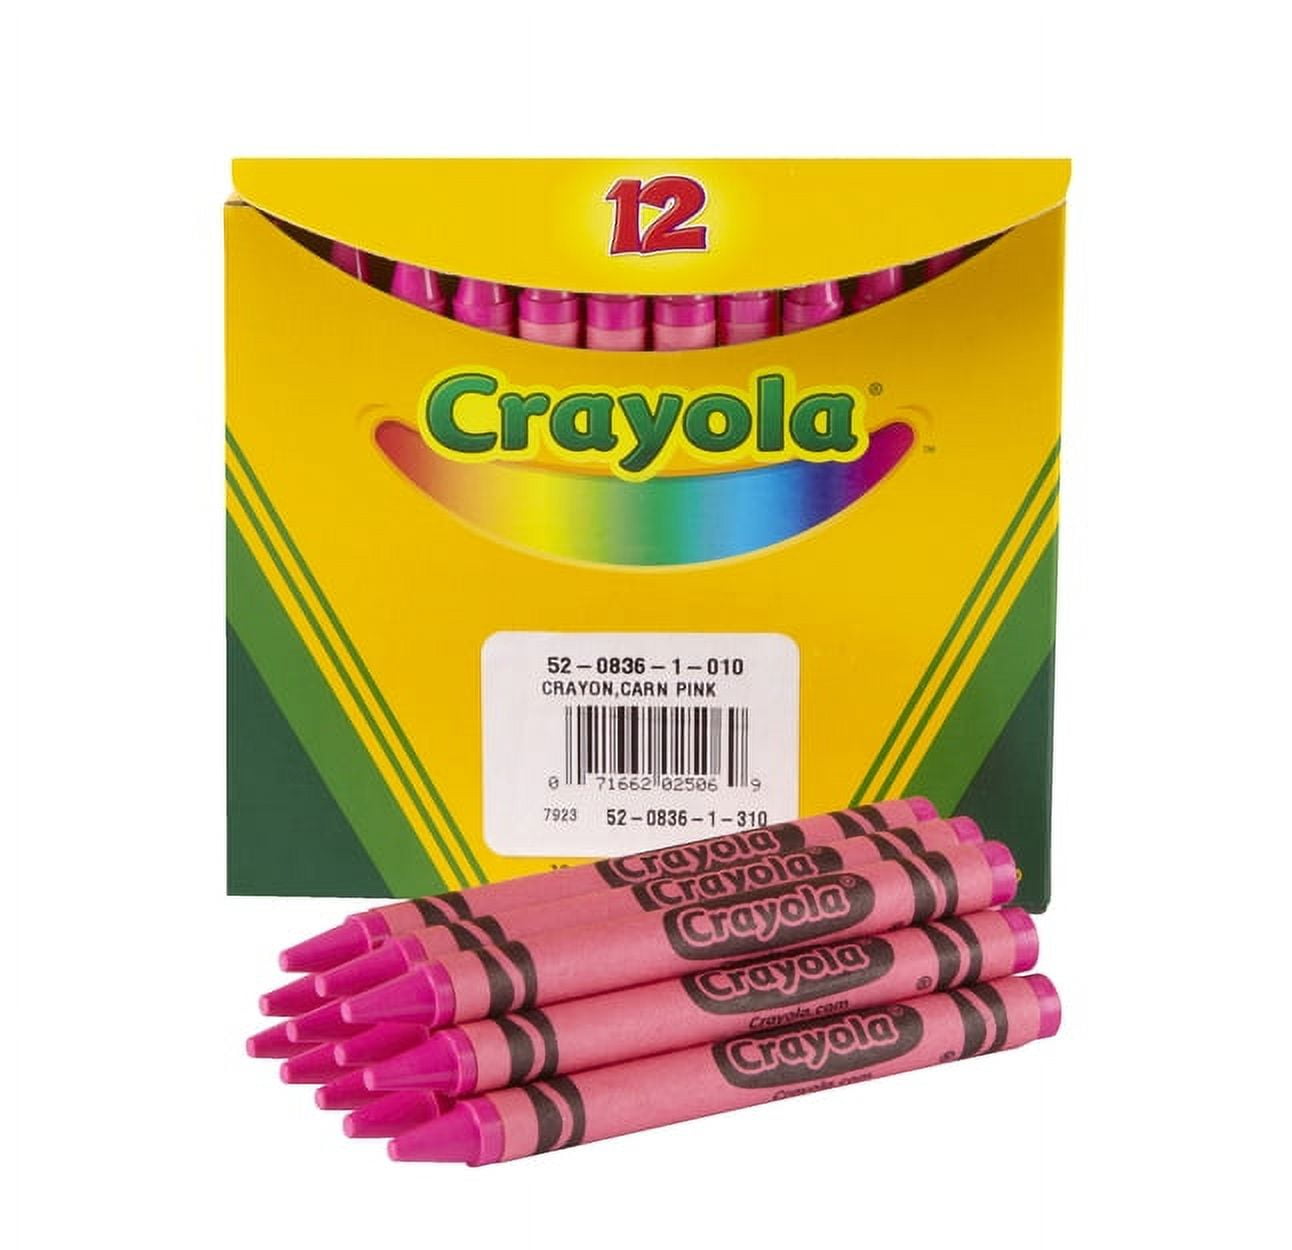 CrayonKing 50 Sets of 4-Packs in Cello (200 total bulk Crayons)  Restaurants, Party Favors, Birthdays, School Teachers & Kids Coloring  Non-Toxic